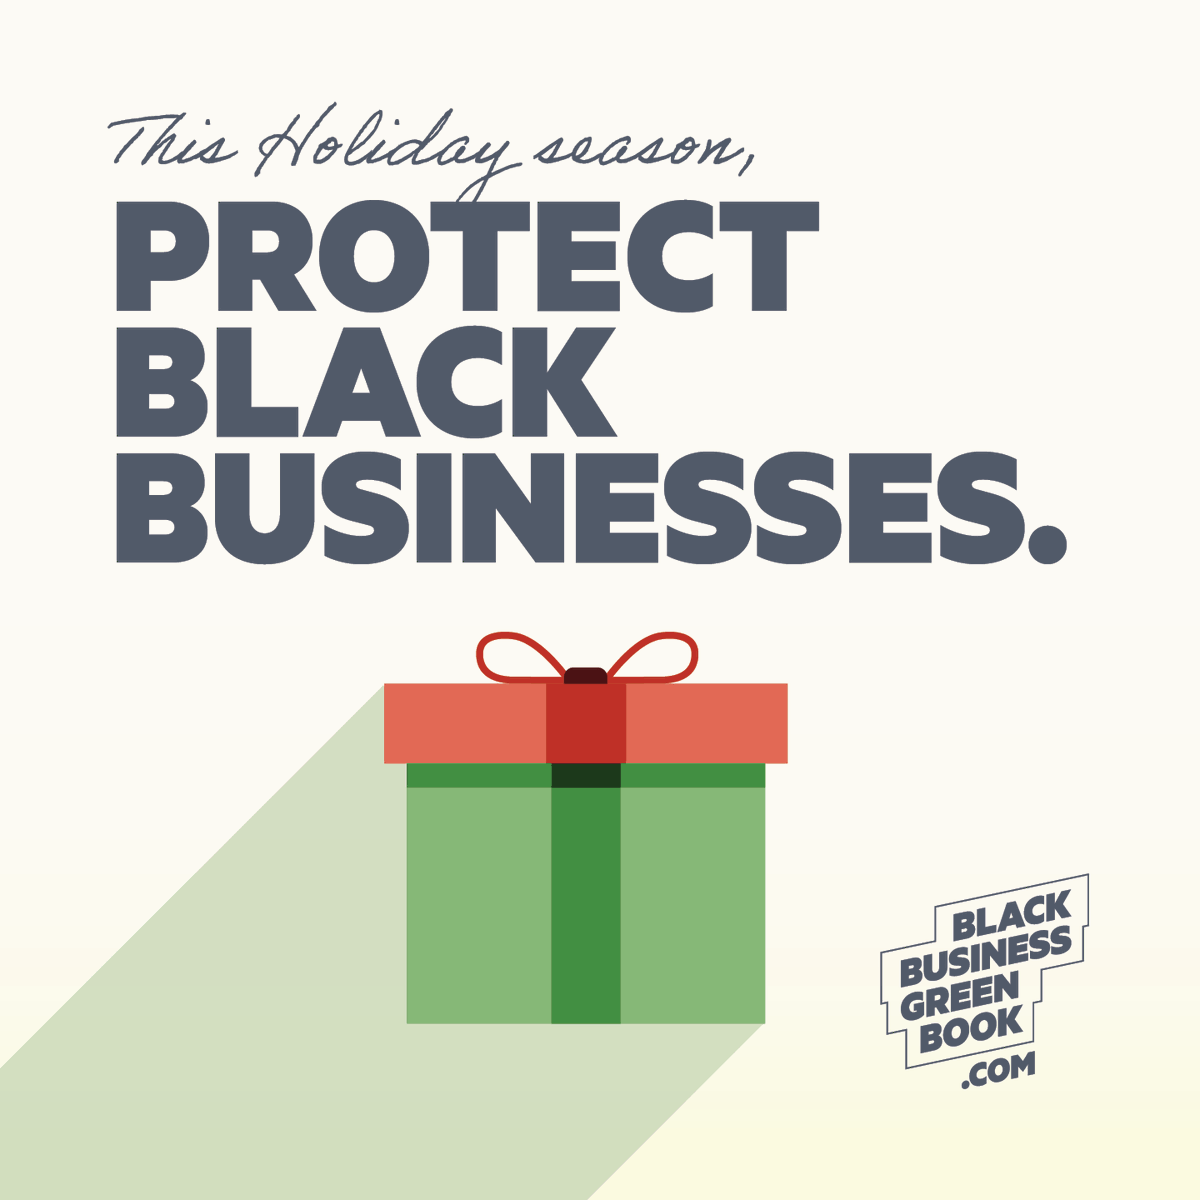 It's #SmallBusinessSaturday - this holiday season, consider giving to small Black businesses to support our communities, rebuild our economies, and establish our financial legacies. coc.is/blackbusinessg…